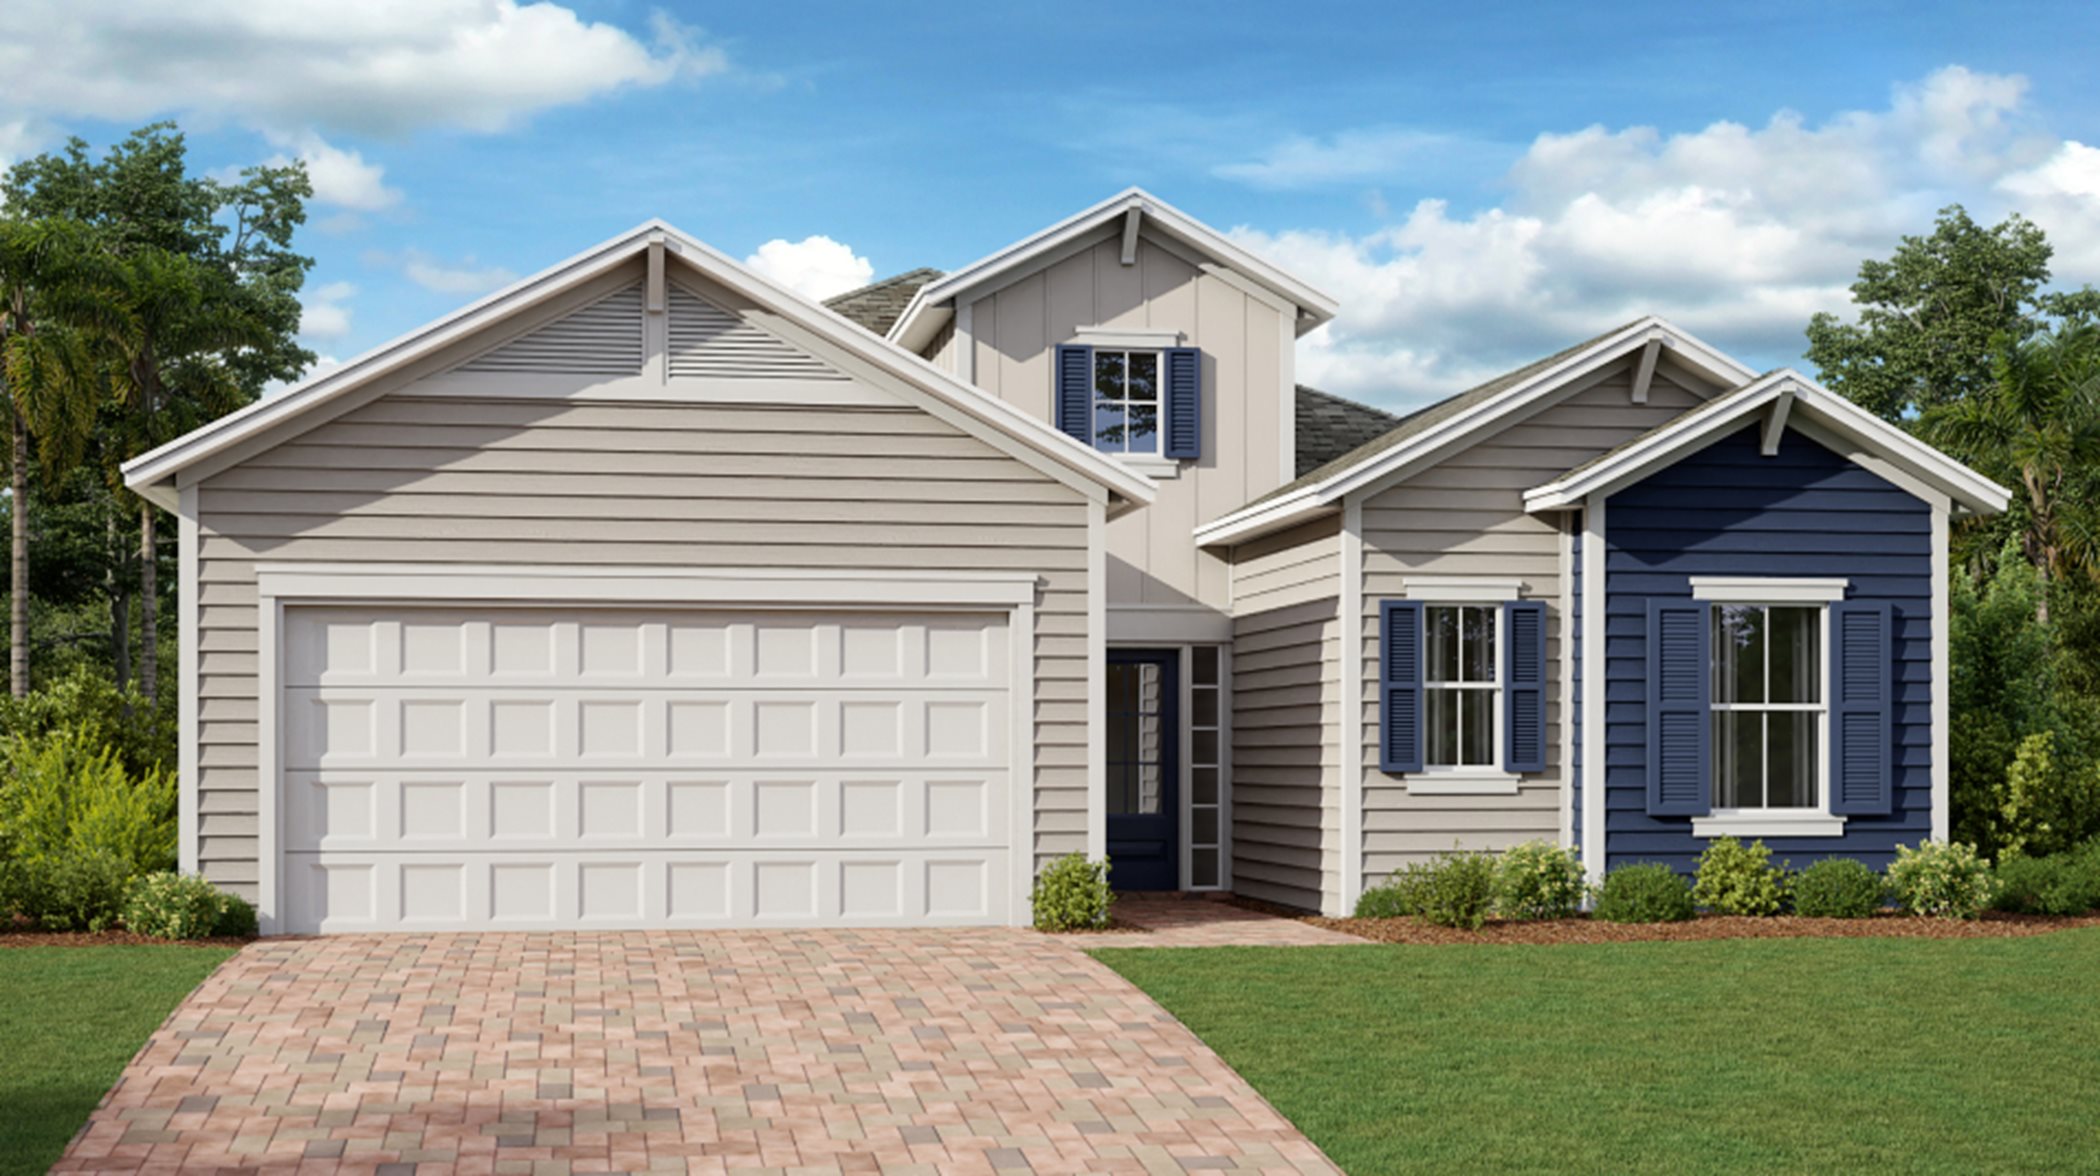 Live-work-learn coastal-inspired exterior